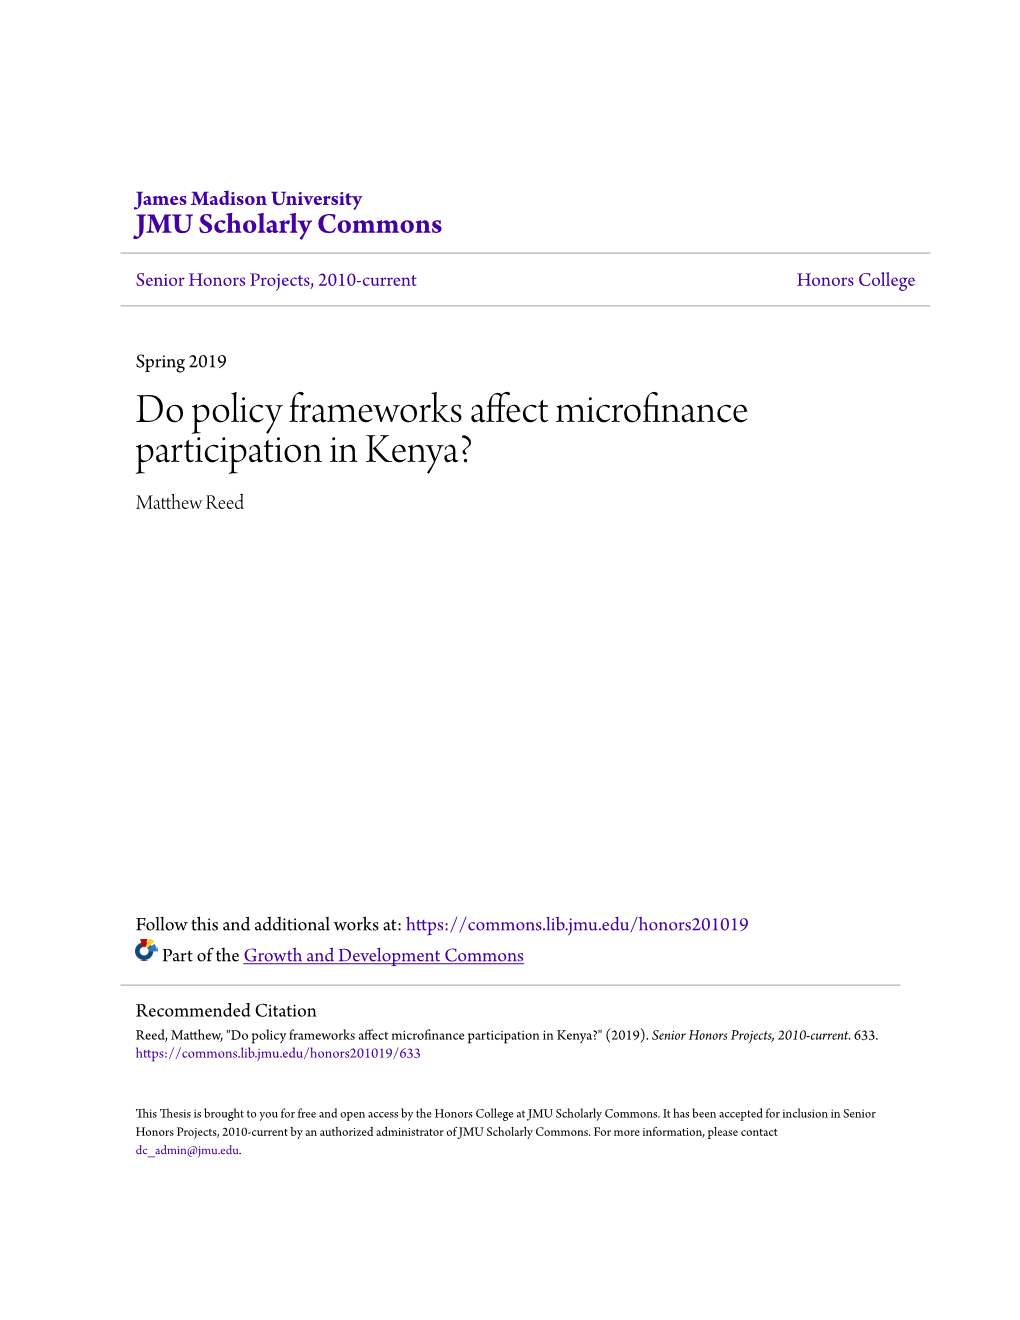 Do Policy Frameworks Affect Microfinance Participation in Kenya? Matthew Reed